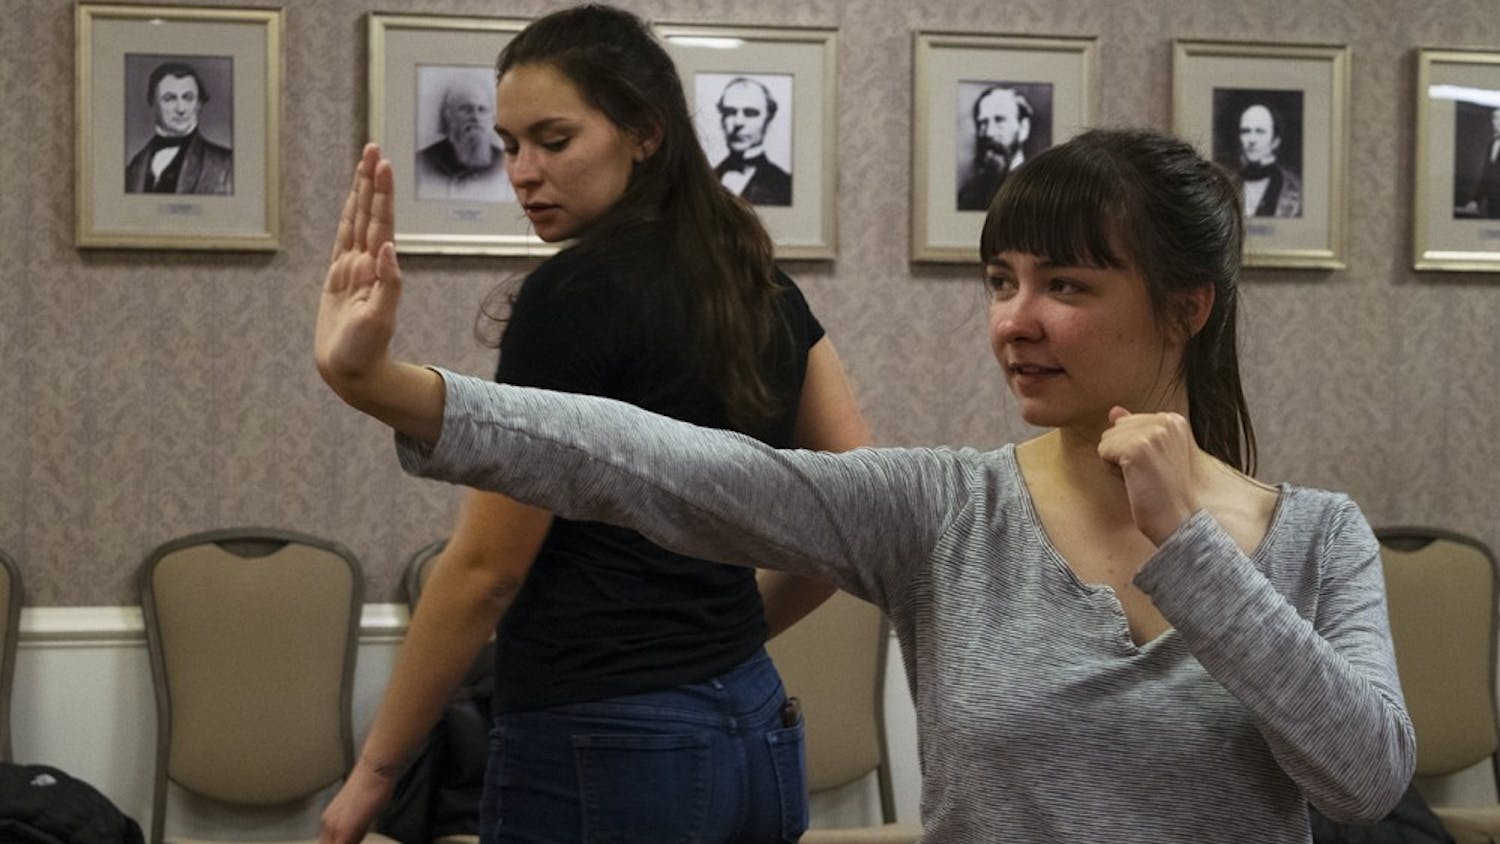 Carmen Vernon, senior, practices a self defense move at the Feminist Student Association meeting Thursday evening. The IU Hapkido / Self Defense Club gave demonstrations on self defense techniques. 